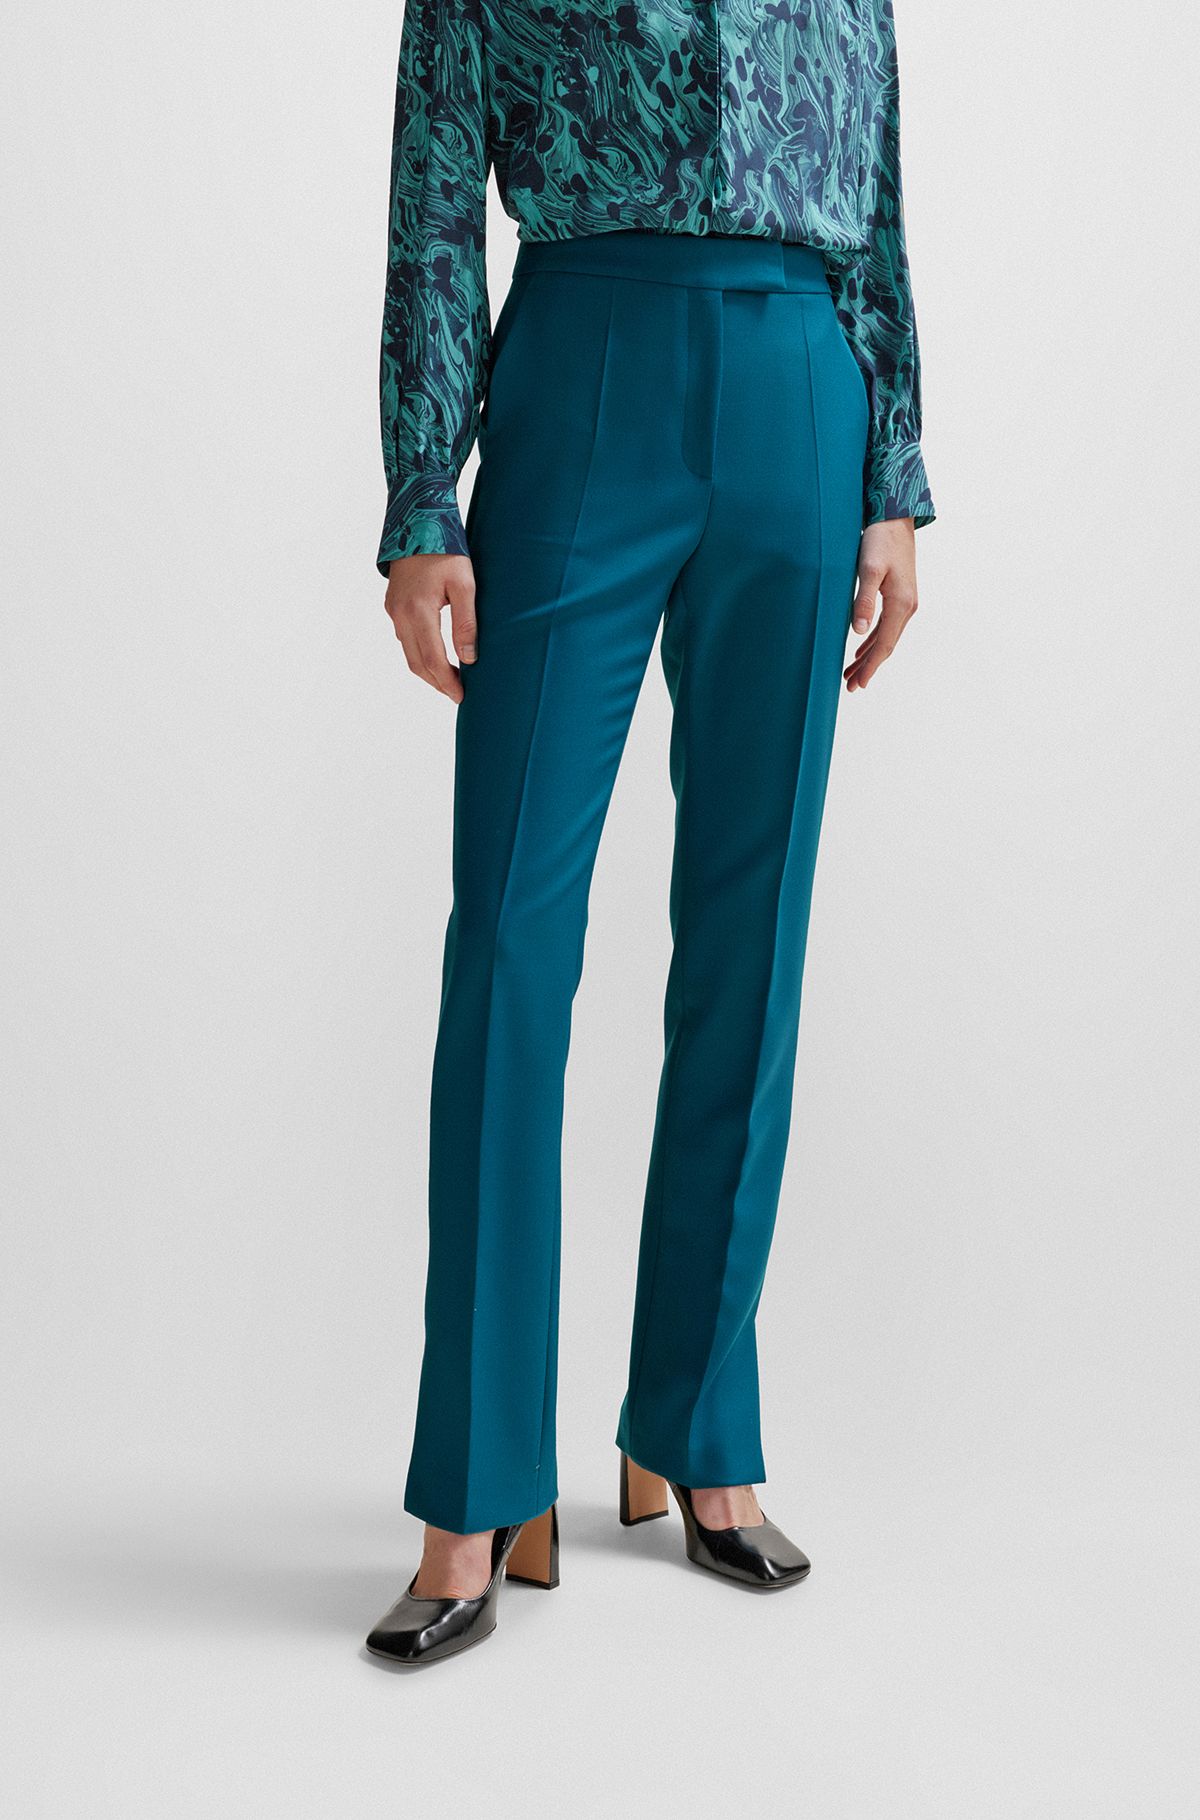 Buy Qeboo Collection Green Formal Pants Tapered High Waist Ankle